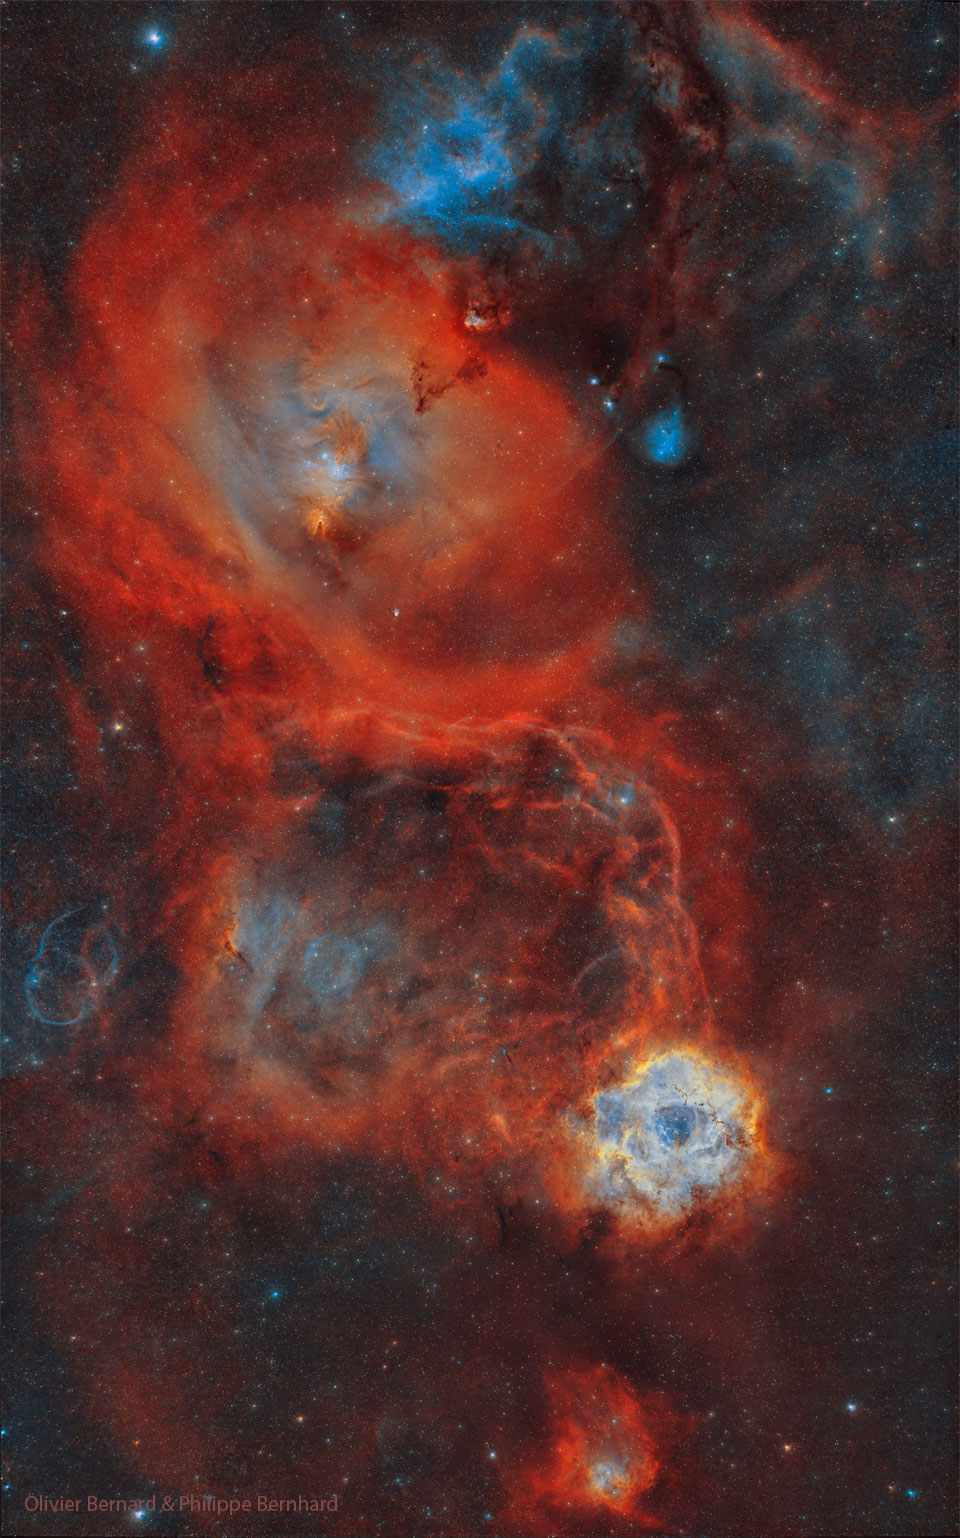 A busy star field is shown with several large red
nebulae. The Rosette Nebula is among them and seen on 
the lower right, while the nebula surrounding the 
Cone Nebula is larger and visible toward the upper left.
Please see the explanation for more detailed information.